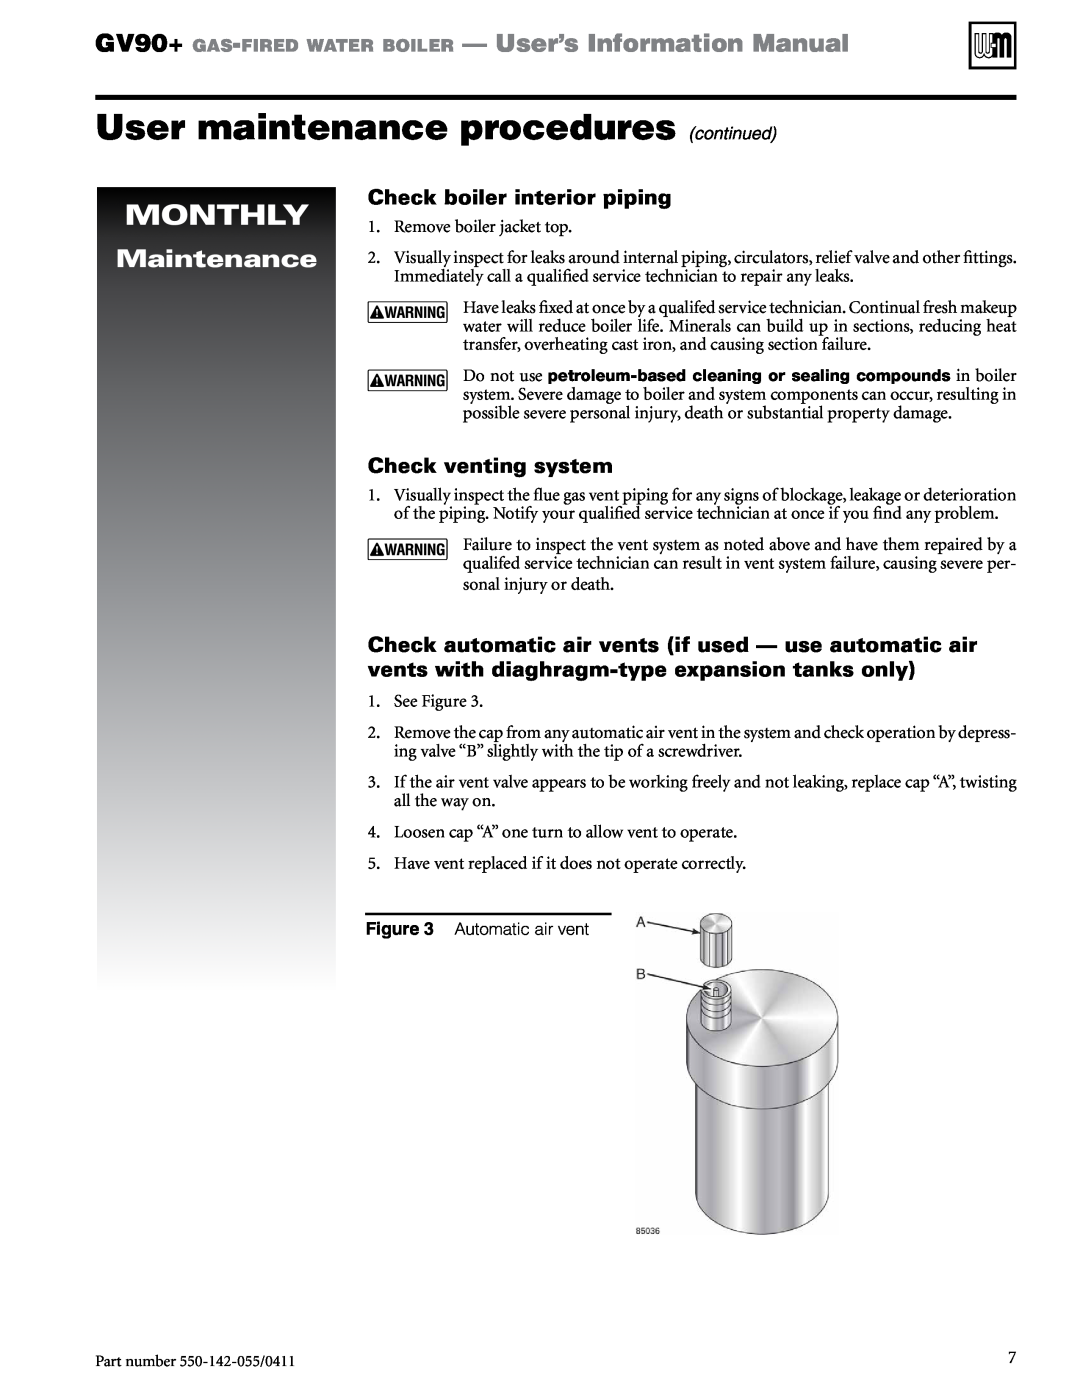 Weil-McLain GV90+ manual User maintenance procedures continued, Monthly, Maintenance, Check boiler interior piping 